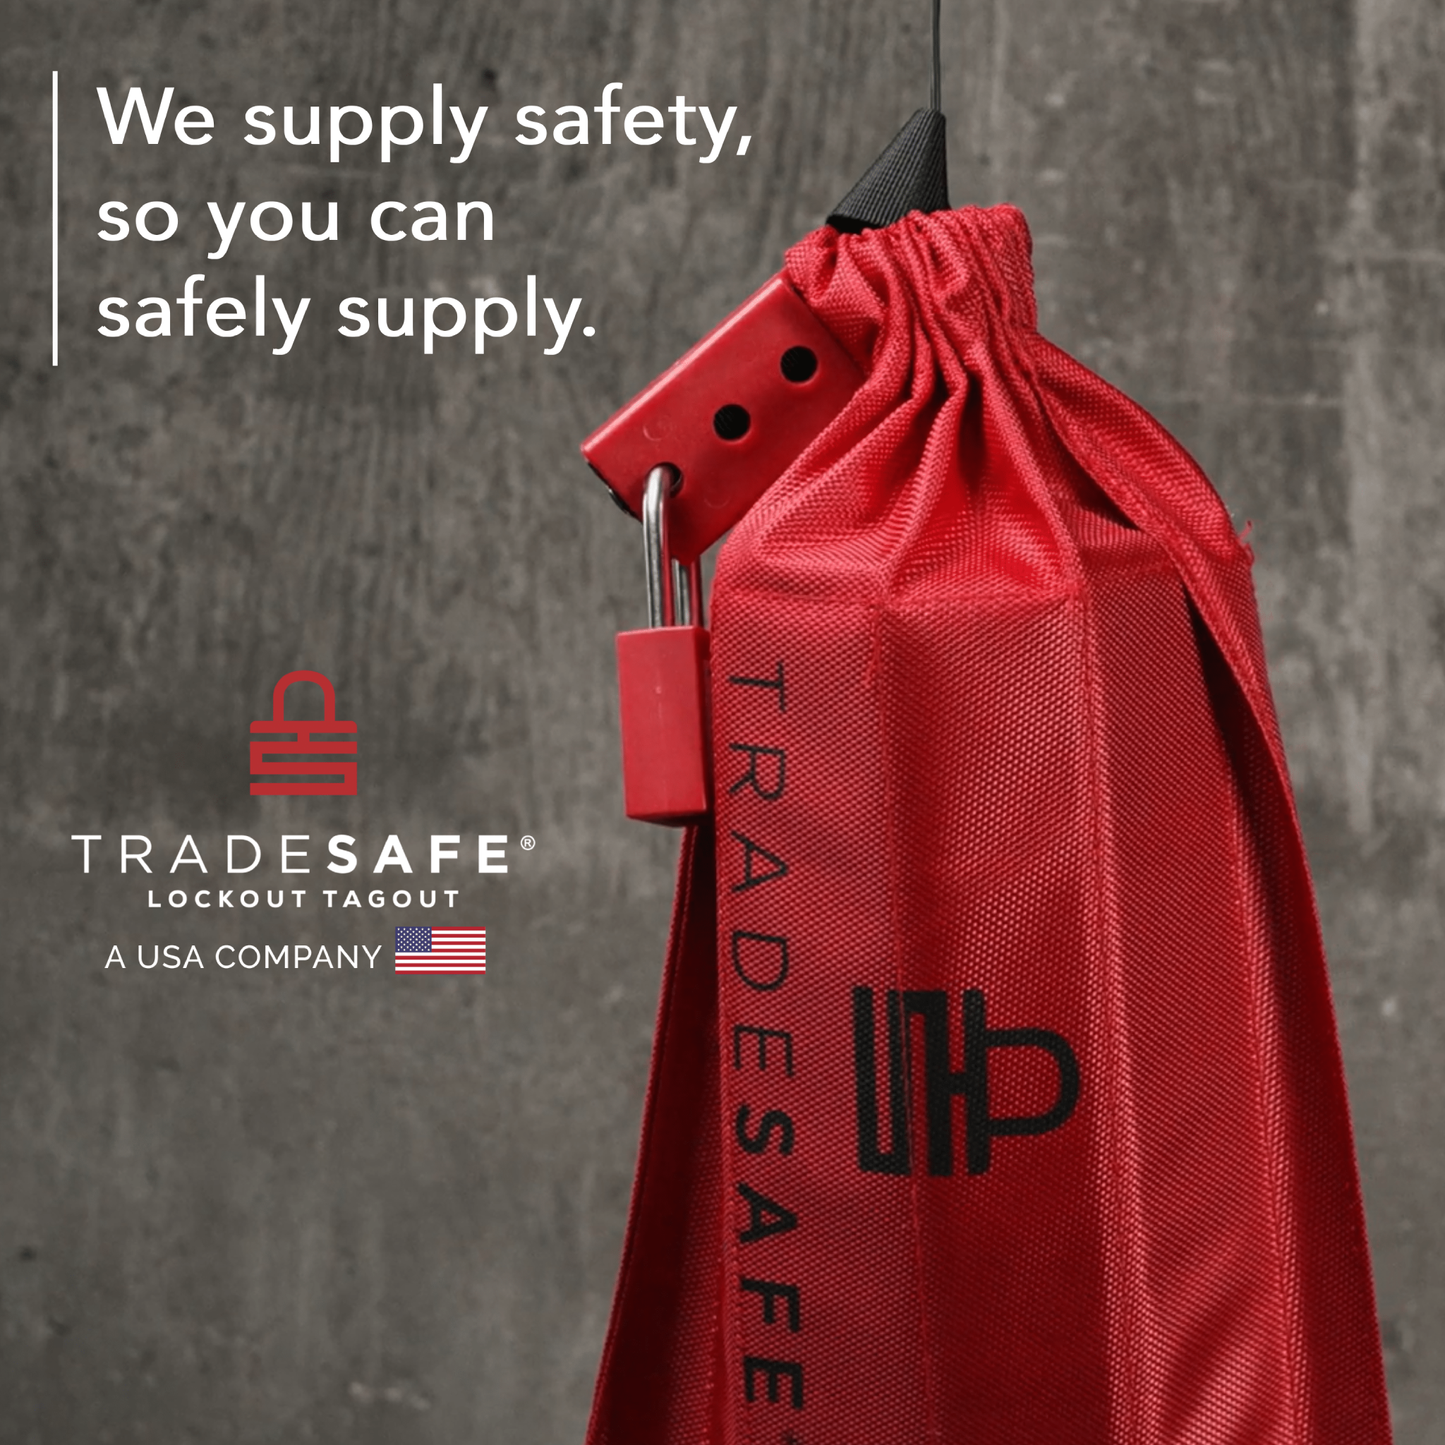 lockout tagout cinch bag brand image; we supply safety, so you can safely supply